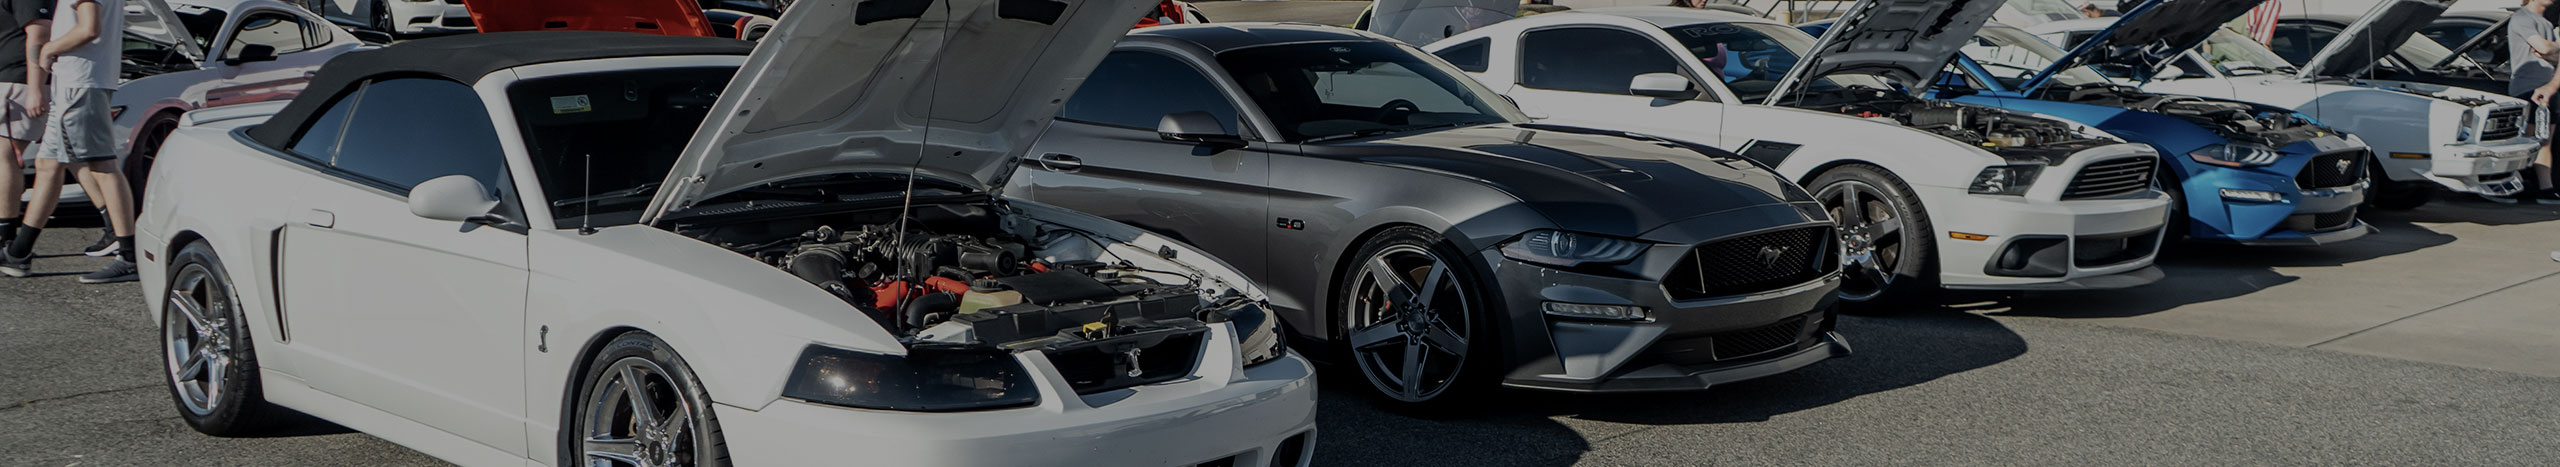 Mustang Events and Car Shows